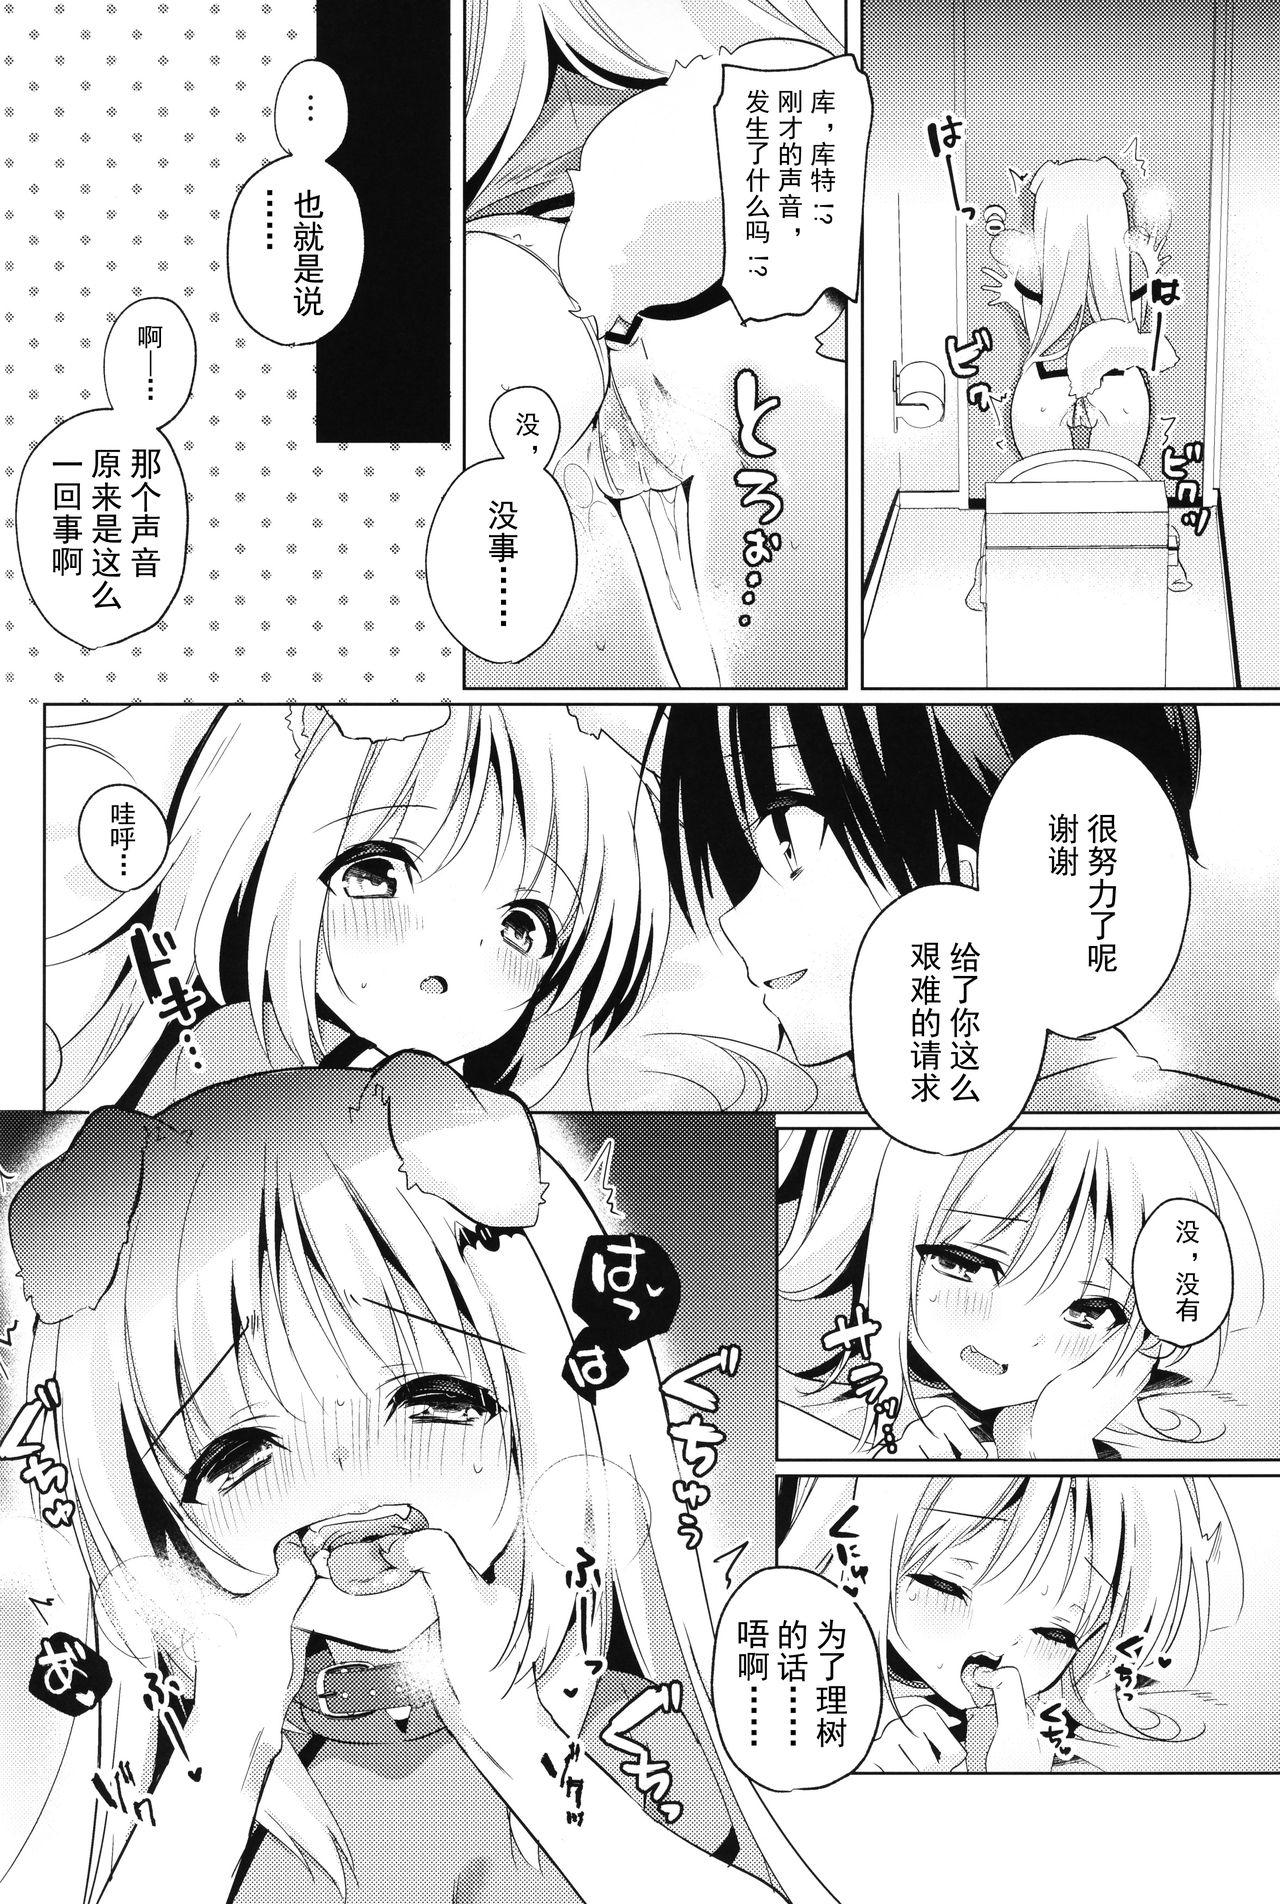 Chibola Kud After4 - Little busters Interview - Page 10